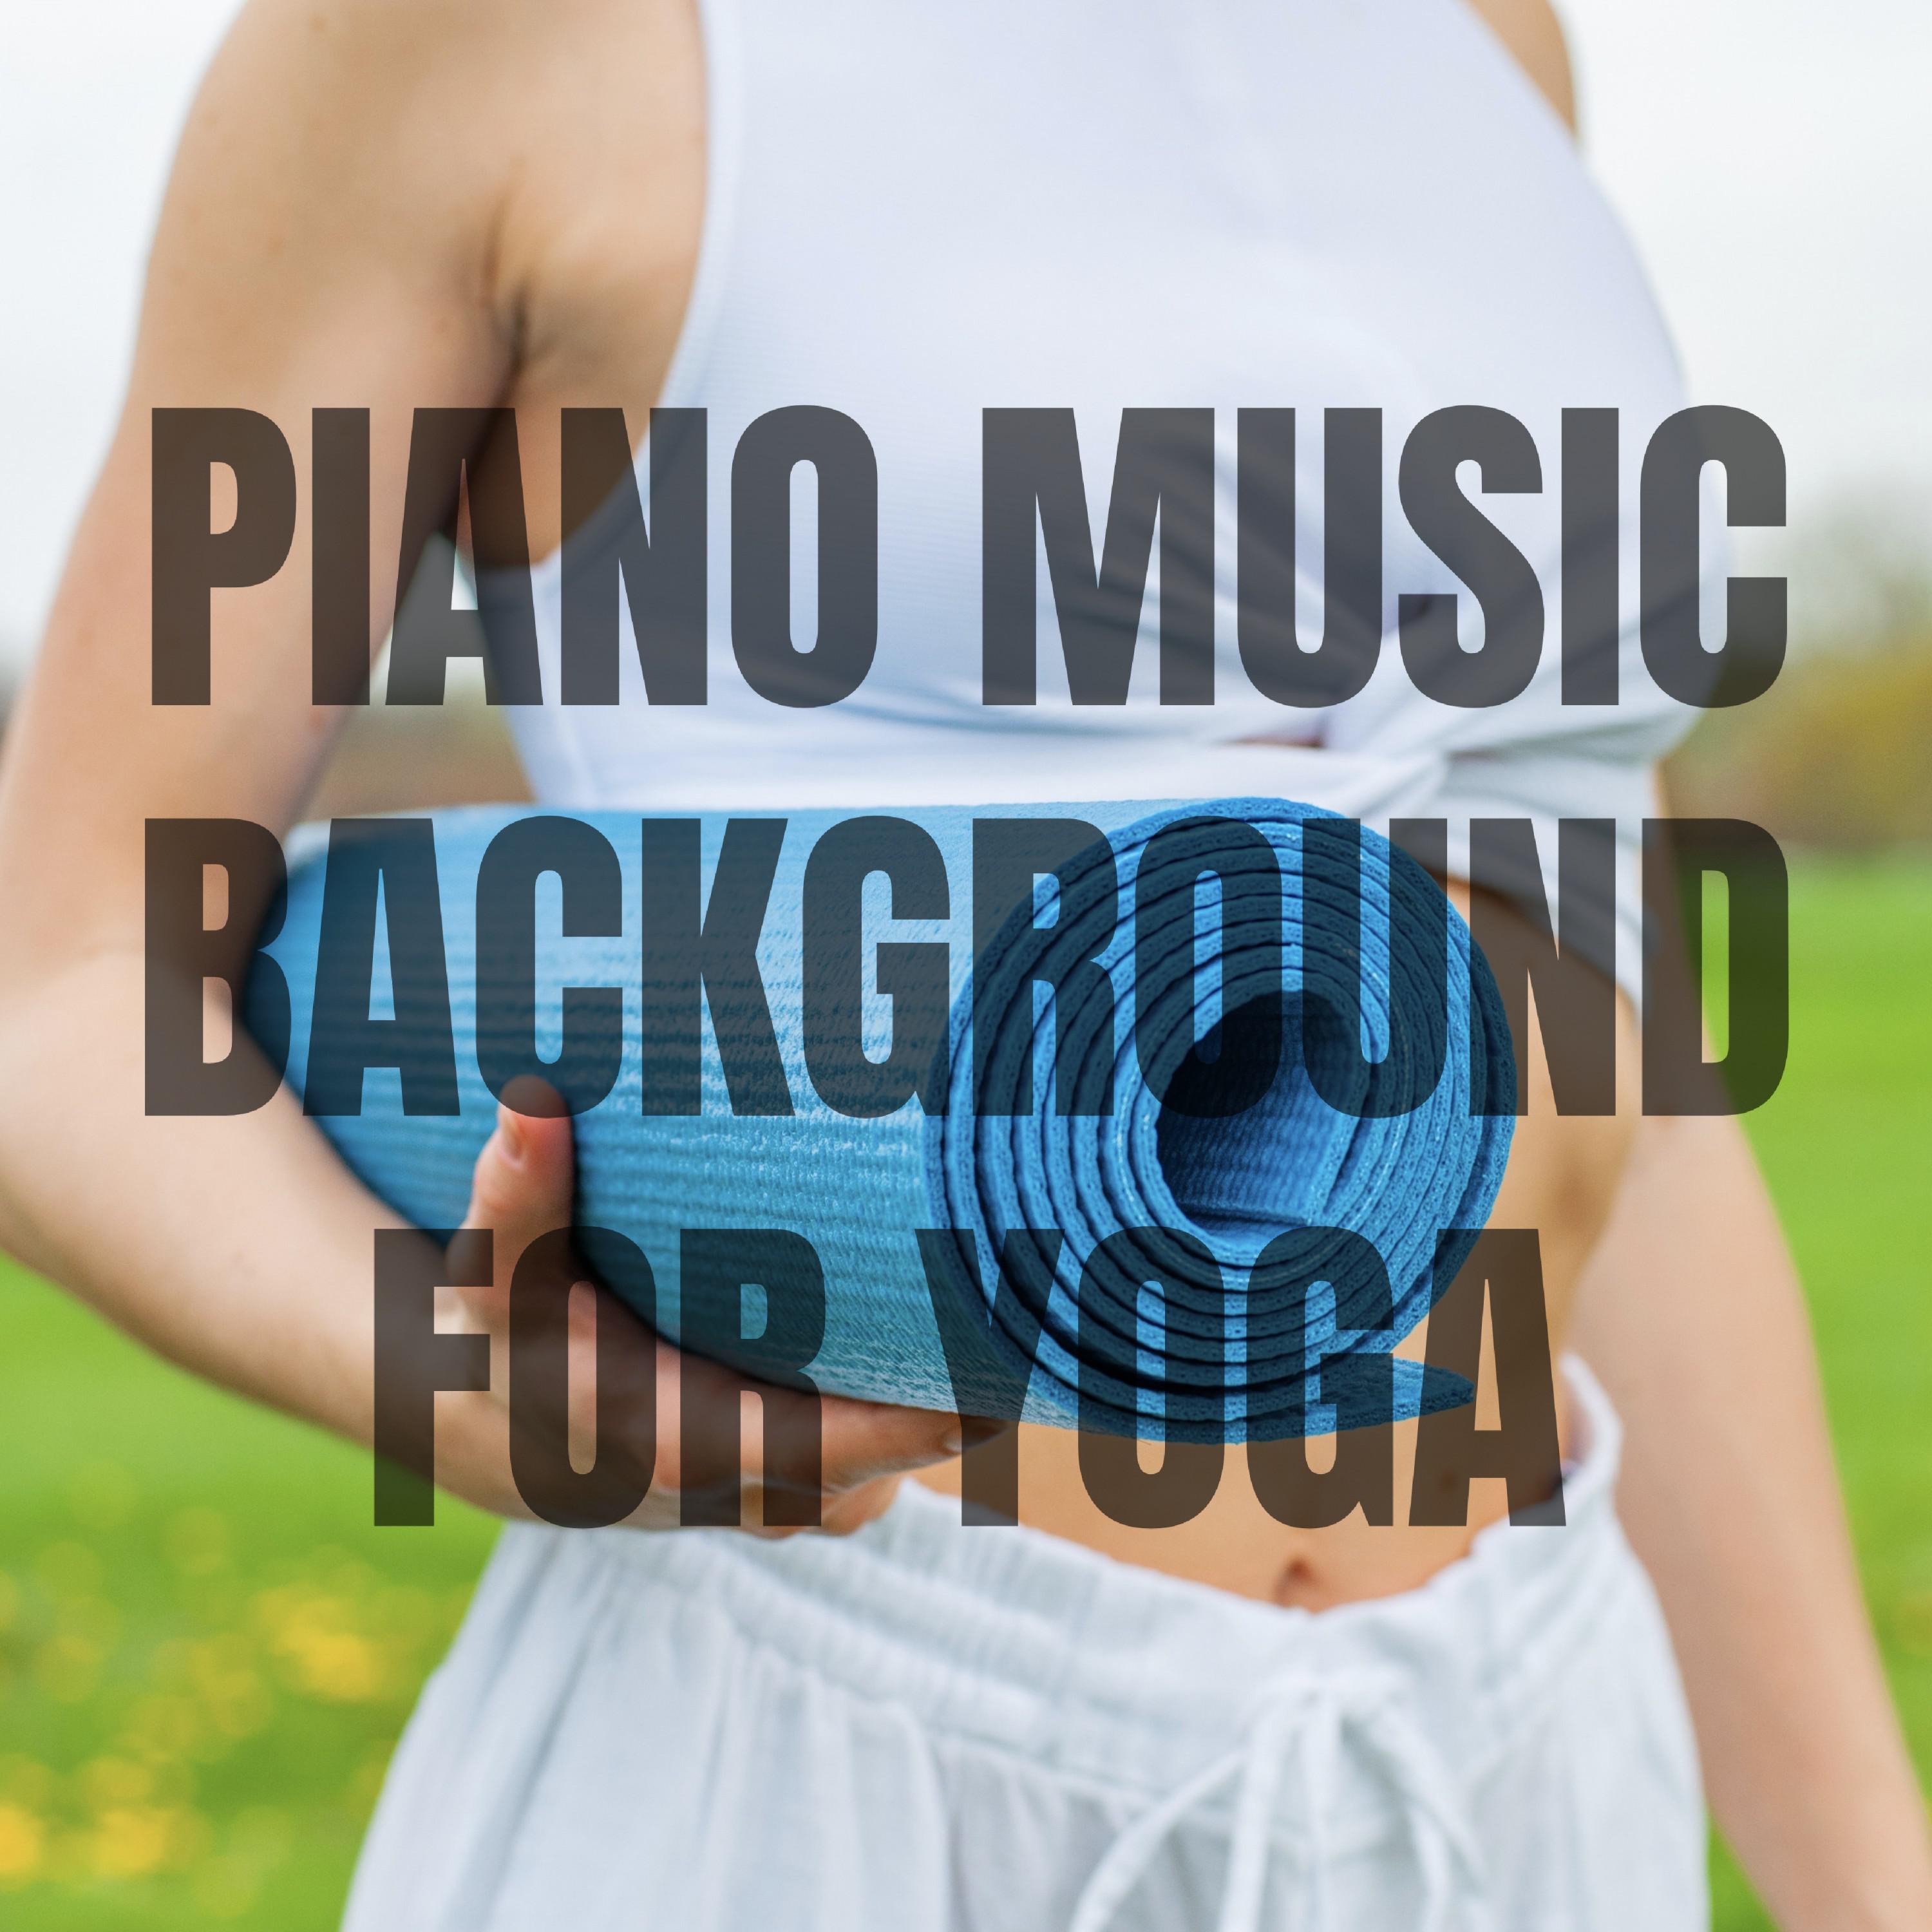 Piano Music Background for Yoga, Relaxation, Zen, Harmony, Deep Concentration, Brain Power, Positive Vibe, Serenity